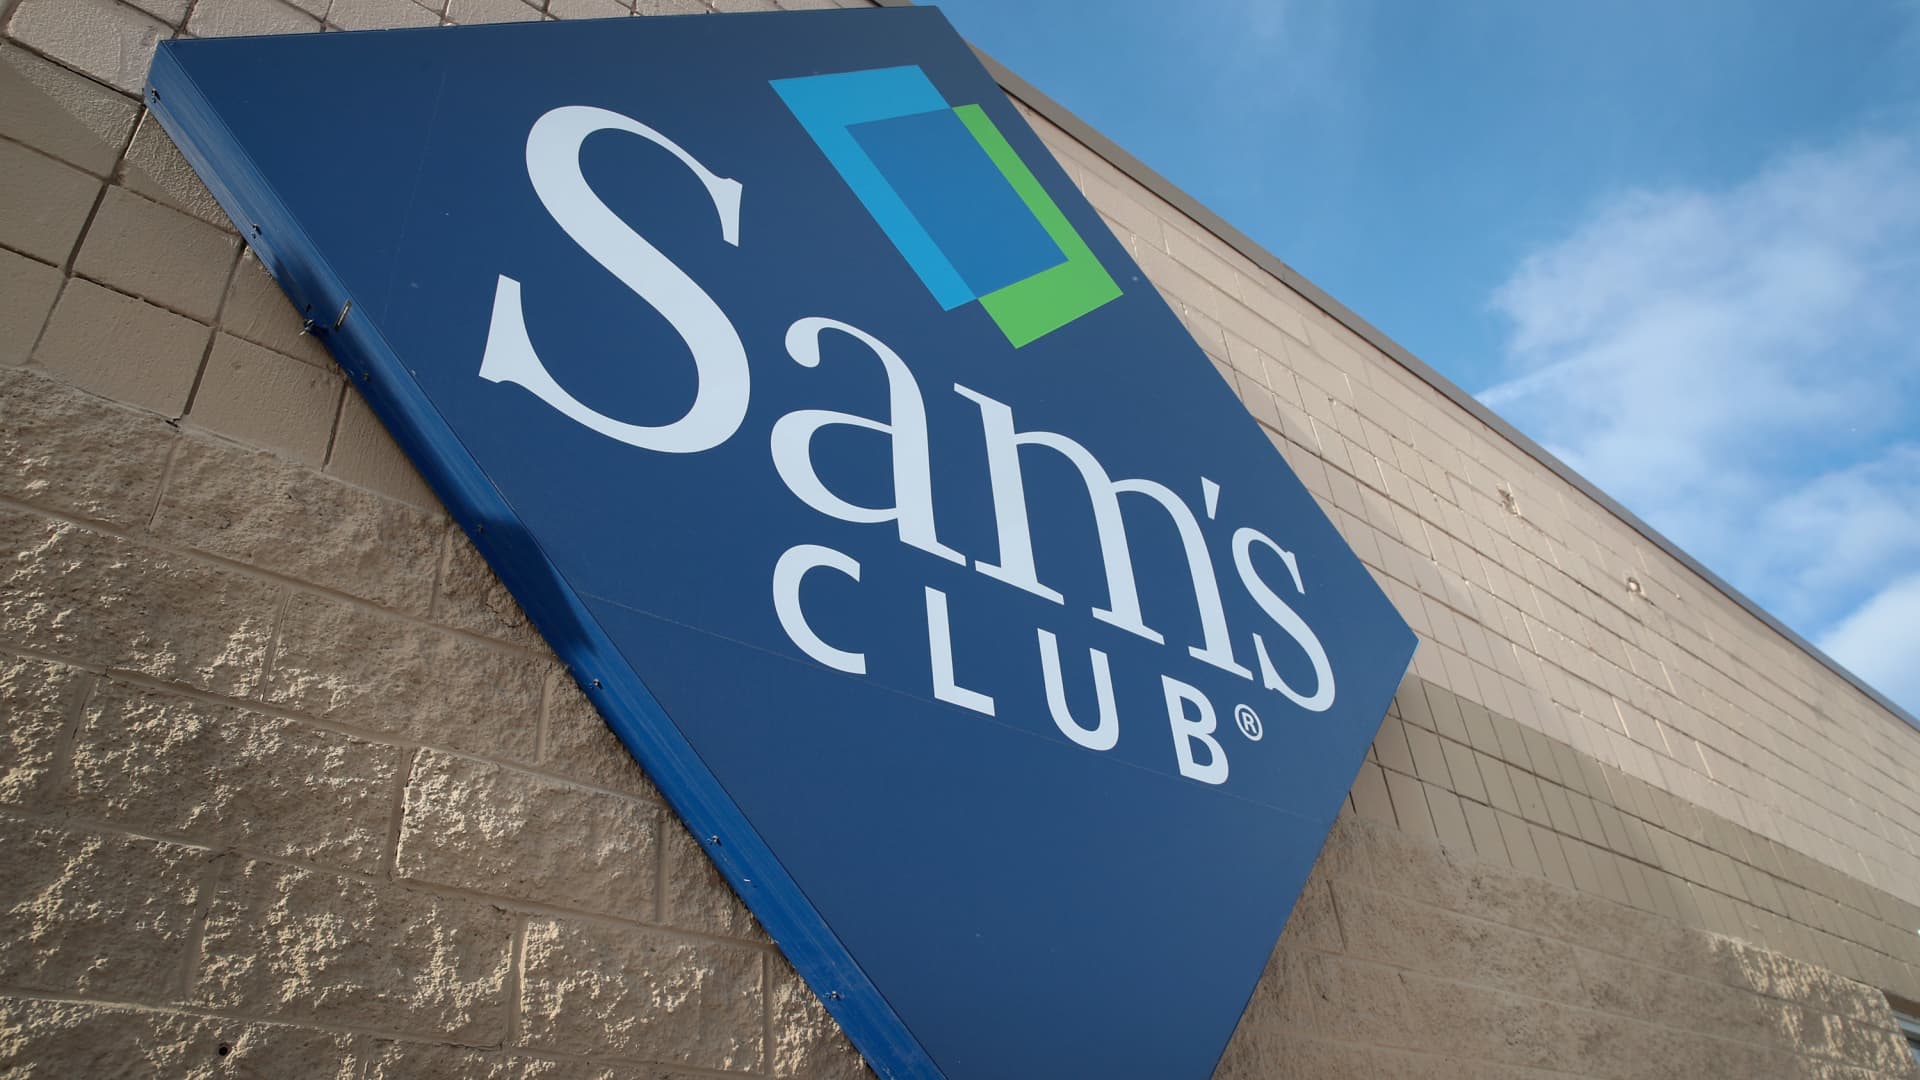 Walmartowned Sam's Club raises annual membership fee for first time in